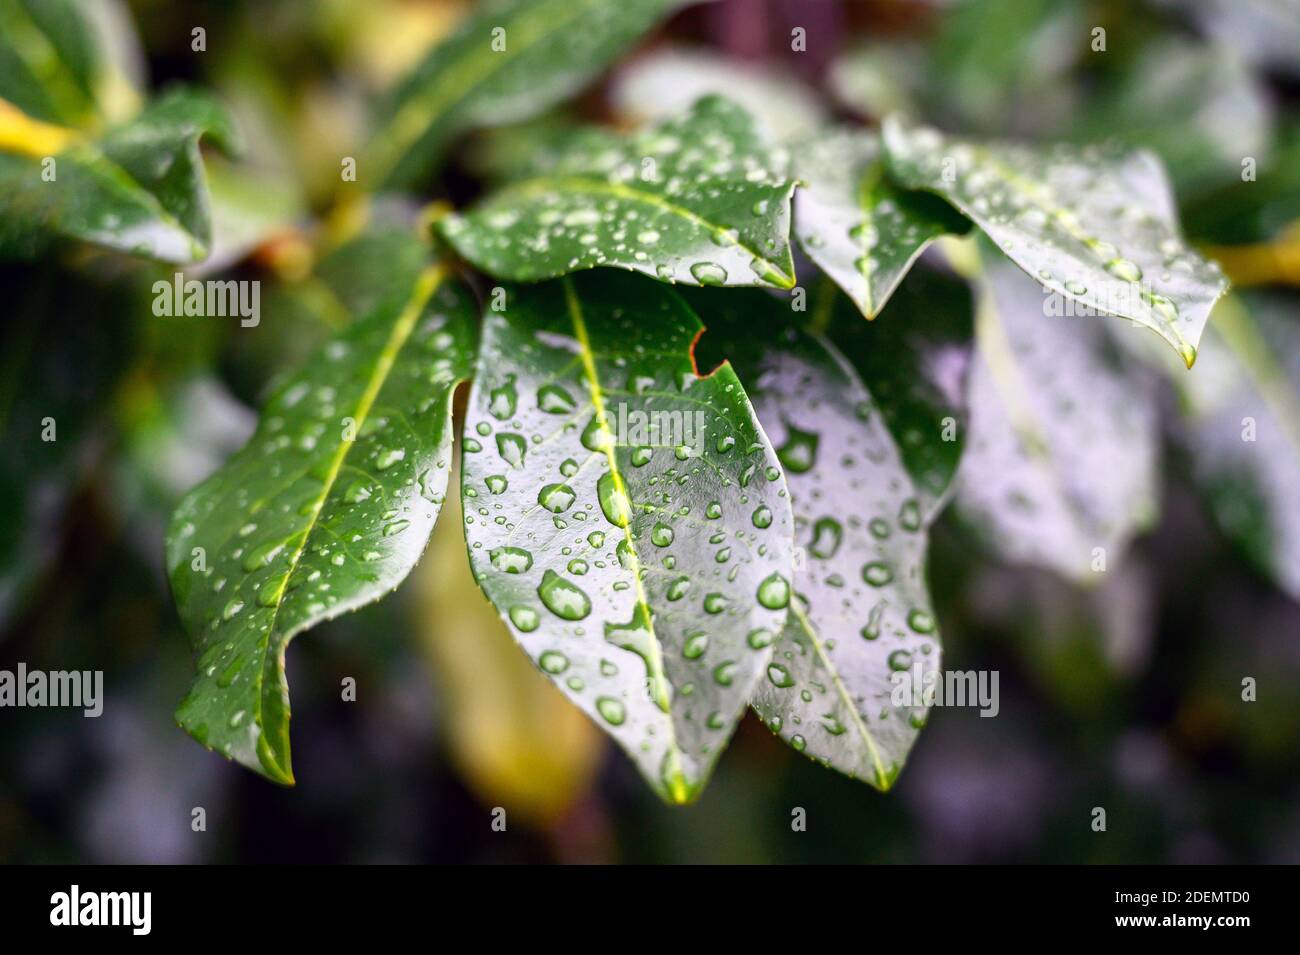 Green leaves with water drops in Kelsey Park, Beckenham, Kent, UK. Focus on the center of the near leaf and drops with soft focus to the edges. Stock Photo